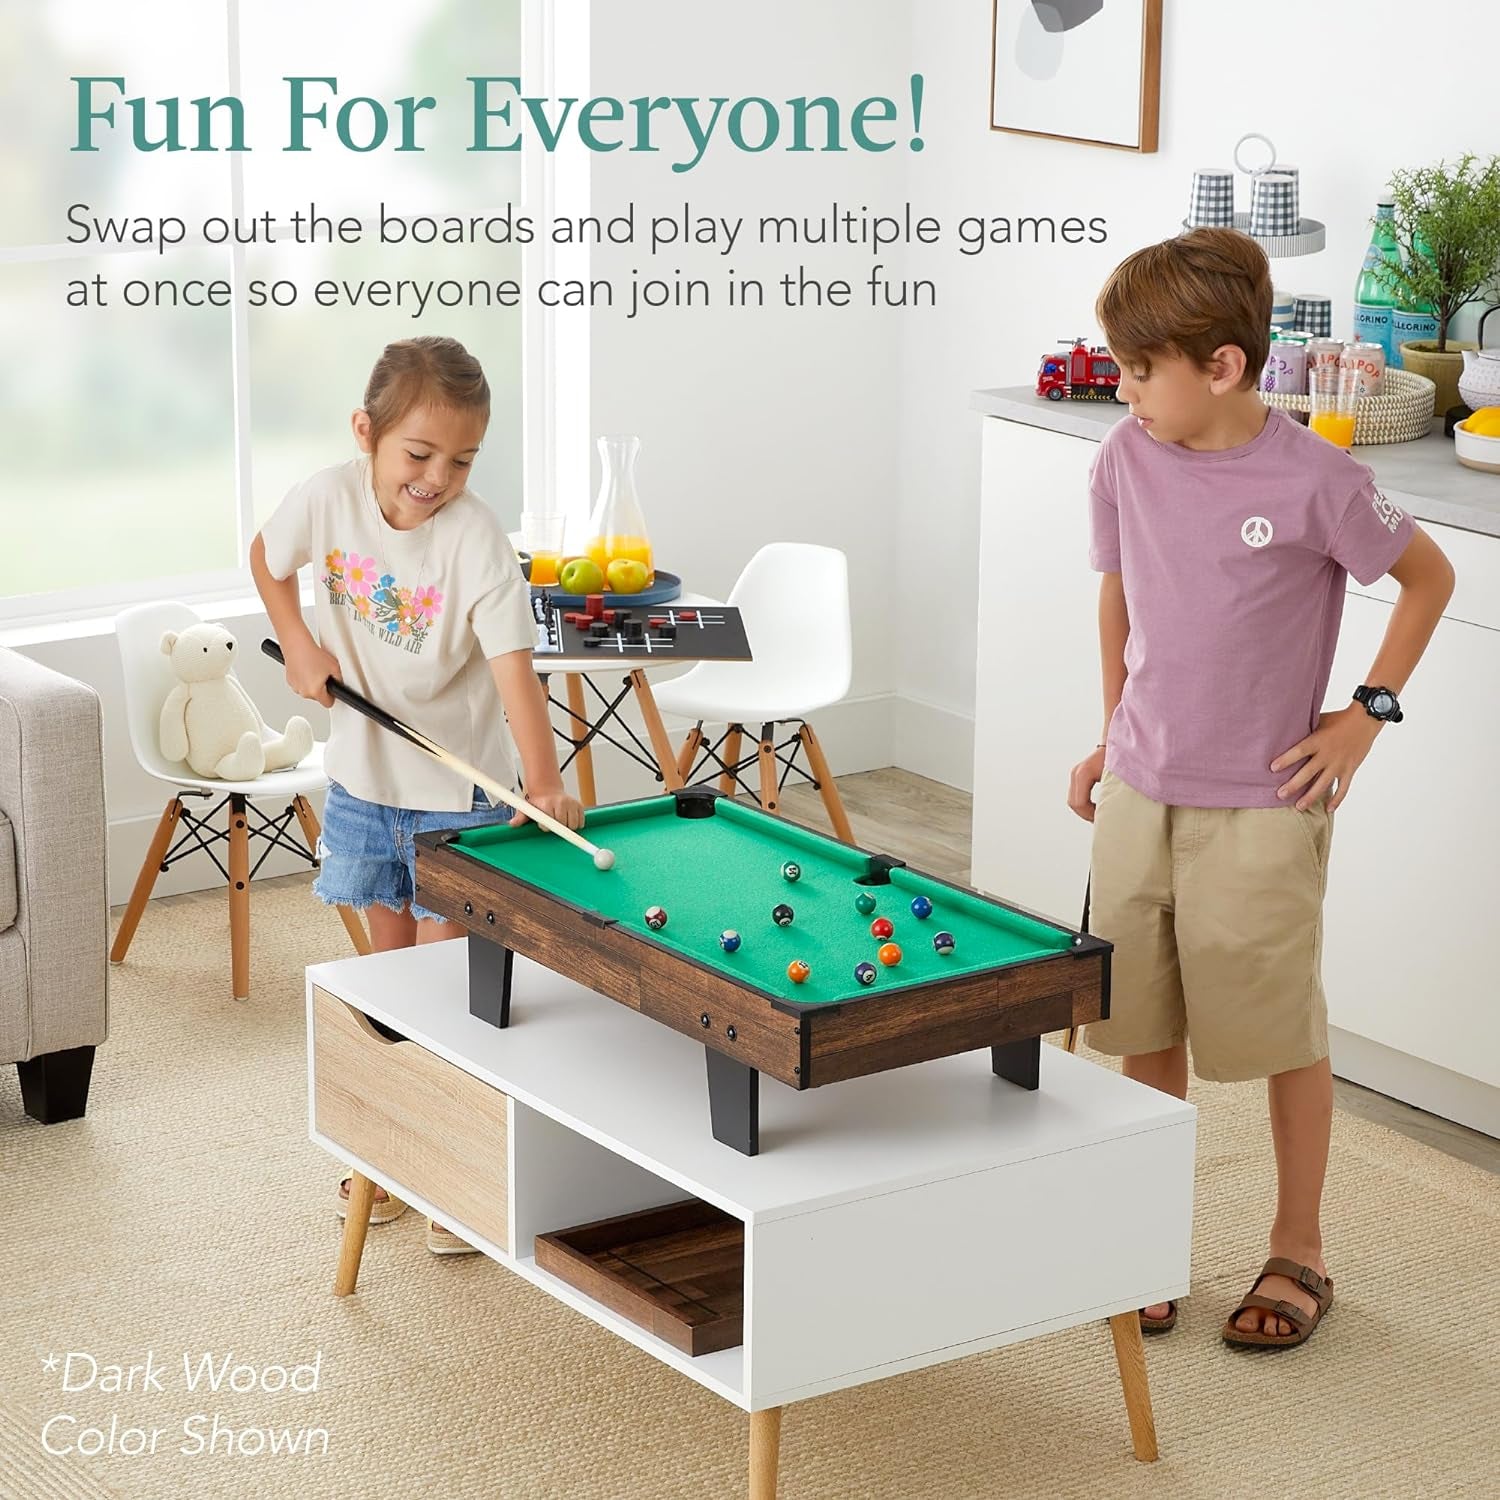 11-In-1 Kids Combo Game Table Set for Home, Game Room W/Ping Pong, Foosball, Table Hockey, Chess, Checkers, Shuffleboard, Bowling, 5 Accessory Bags